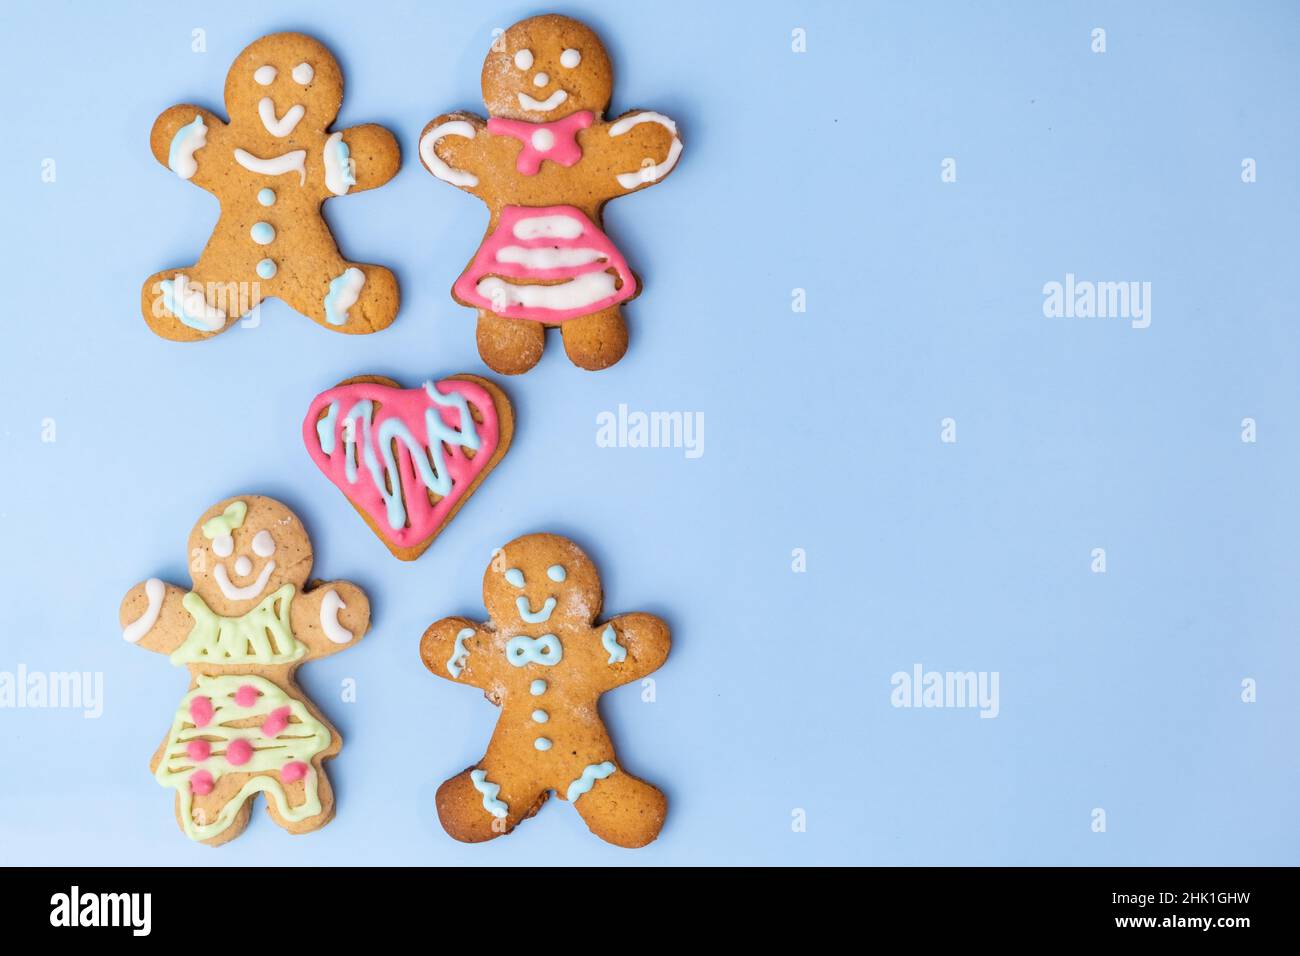 Heterosexual cookie couples, boys and girls and gingerbread heart with icing on the blue background with copy space. Cookies for St Valentines Day Stock Photo